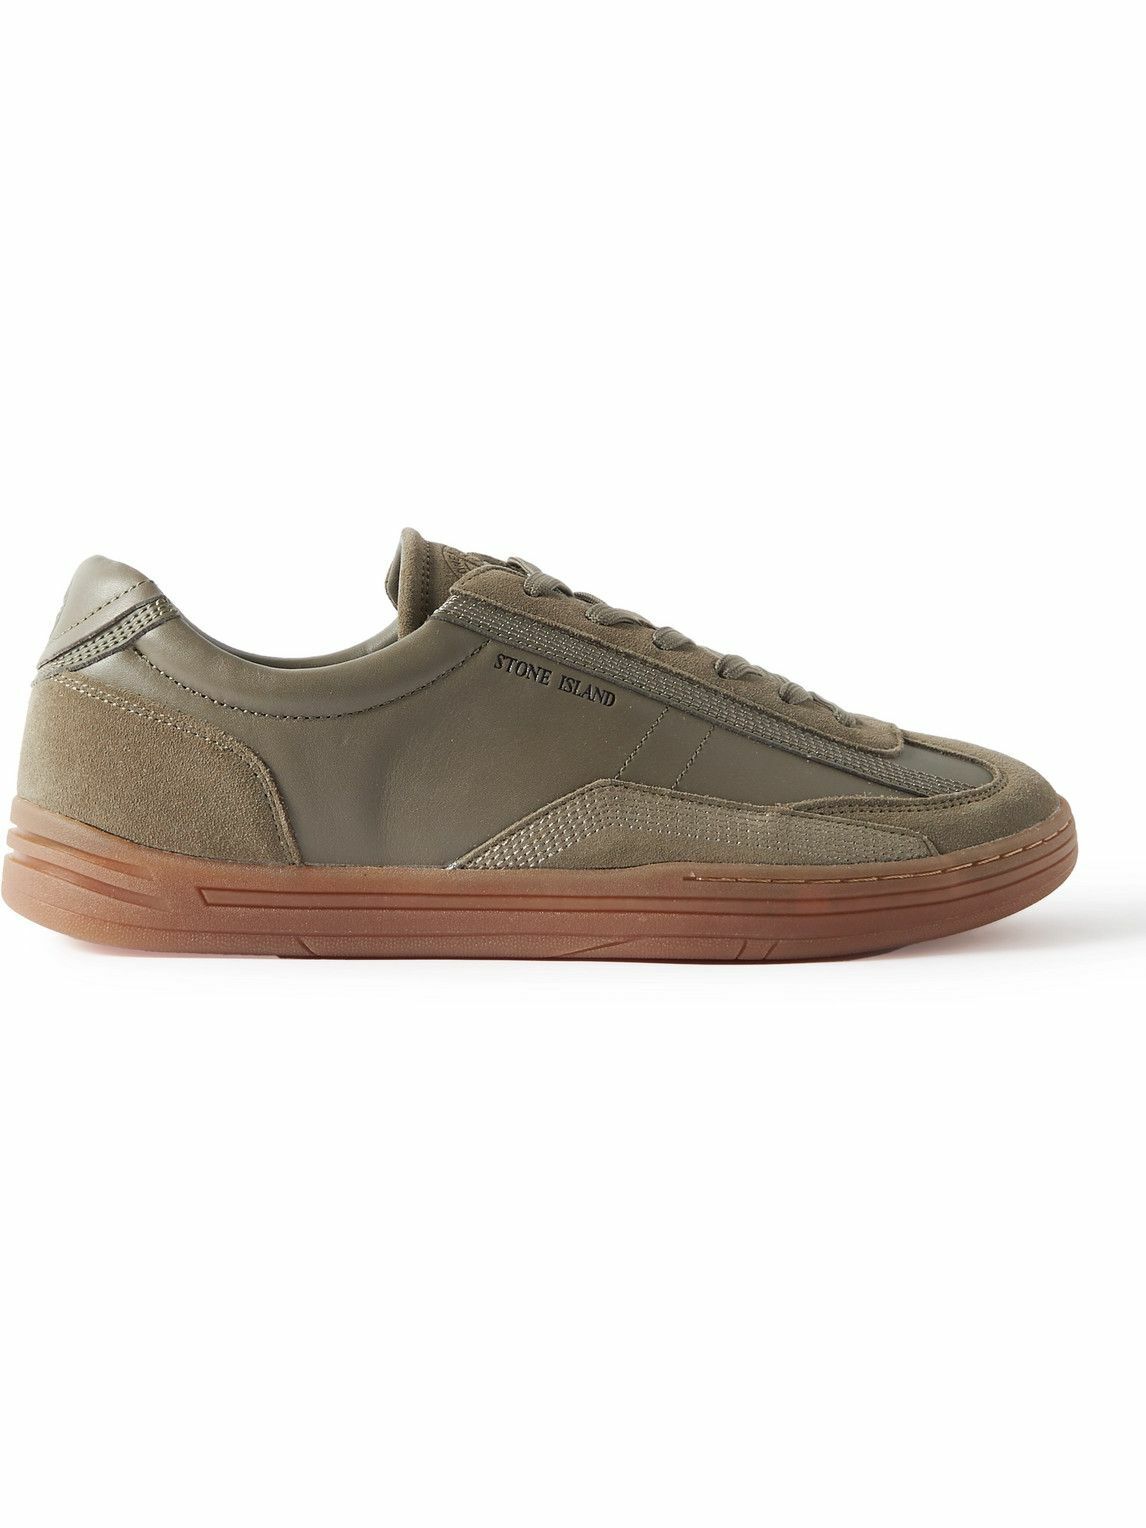 Photo: Stone Island - Rock Suede-Trimmed Leather Sneakers - Green